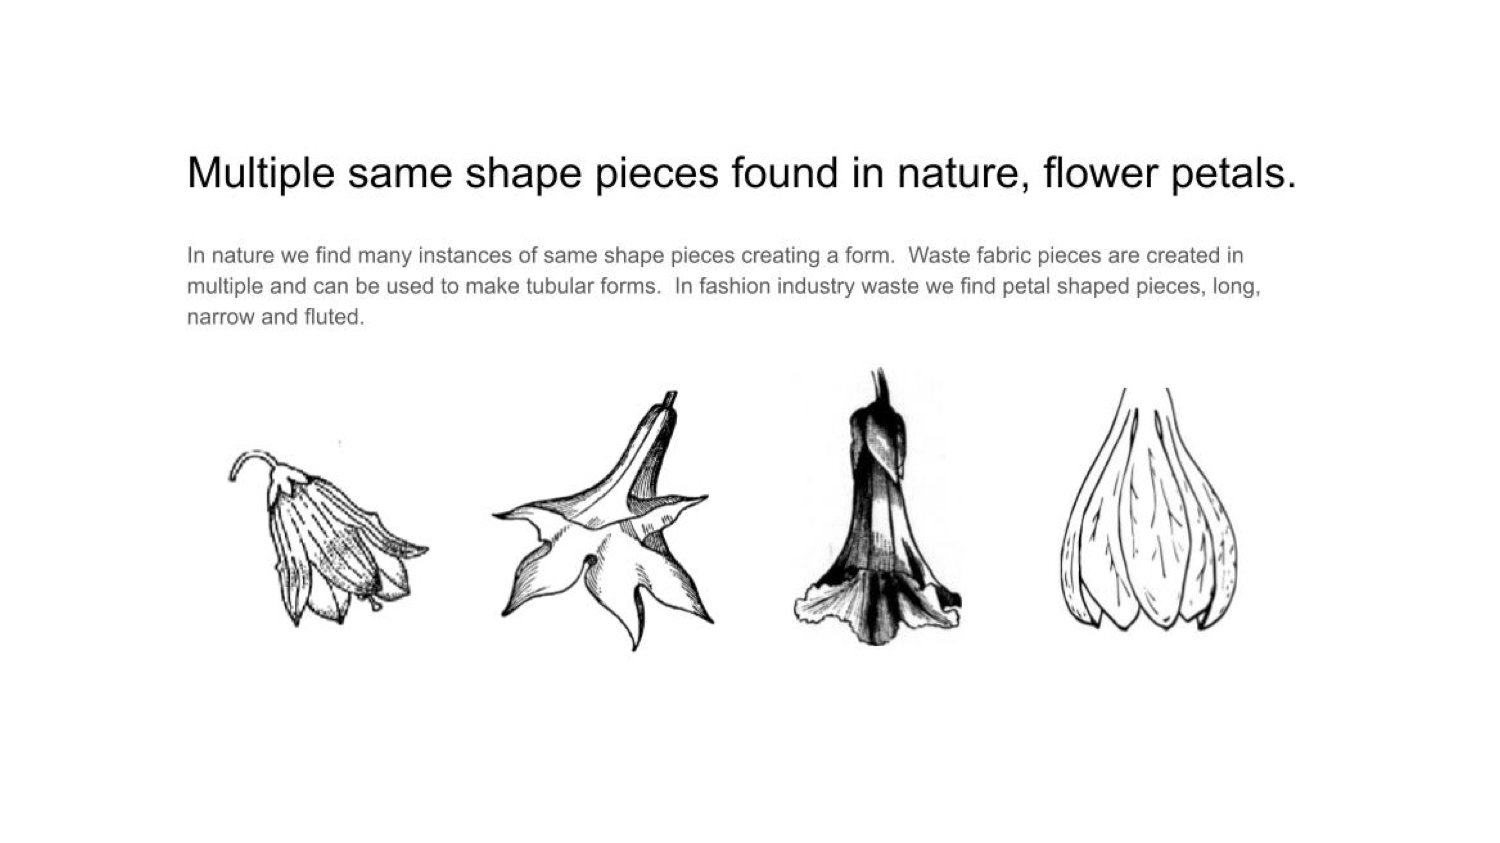 As you can see in the illustration nature also uses radial projection to create cylindrical objects.